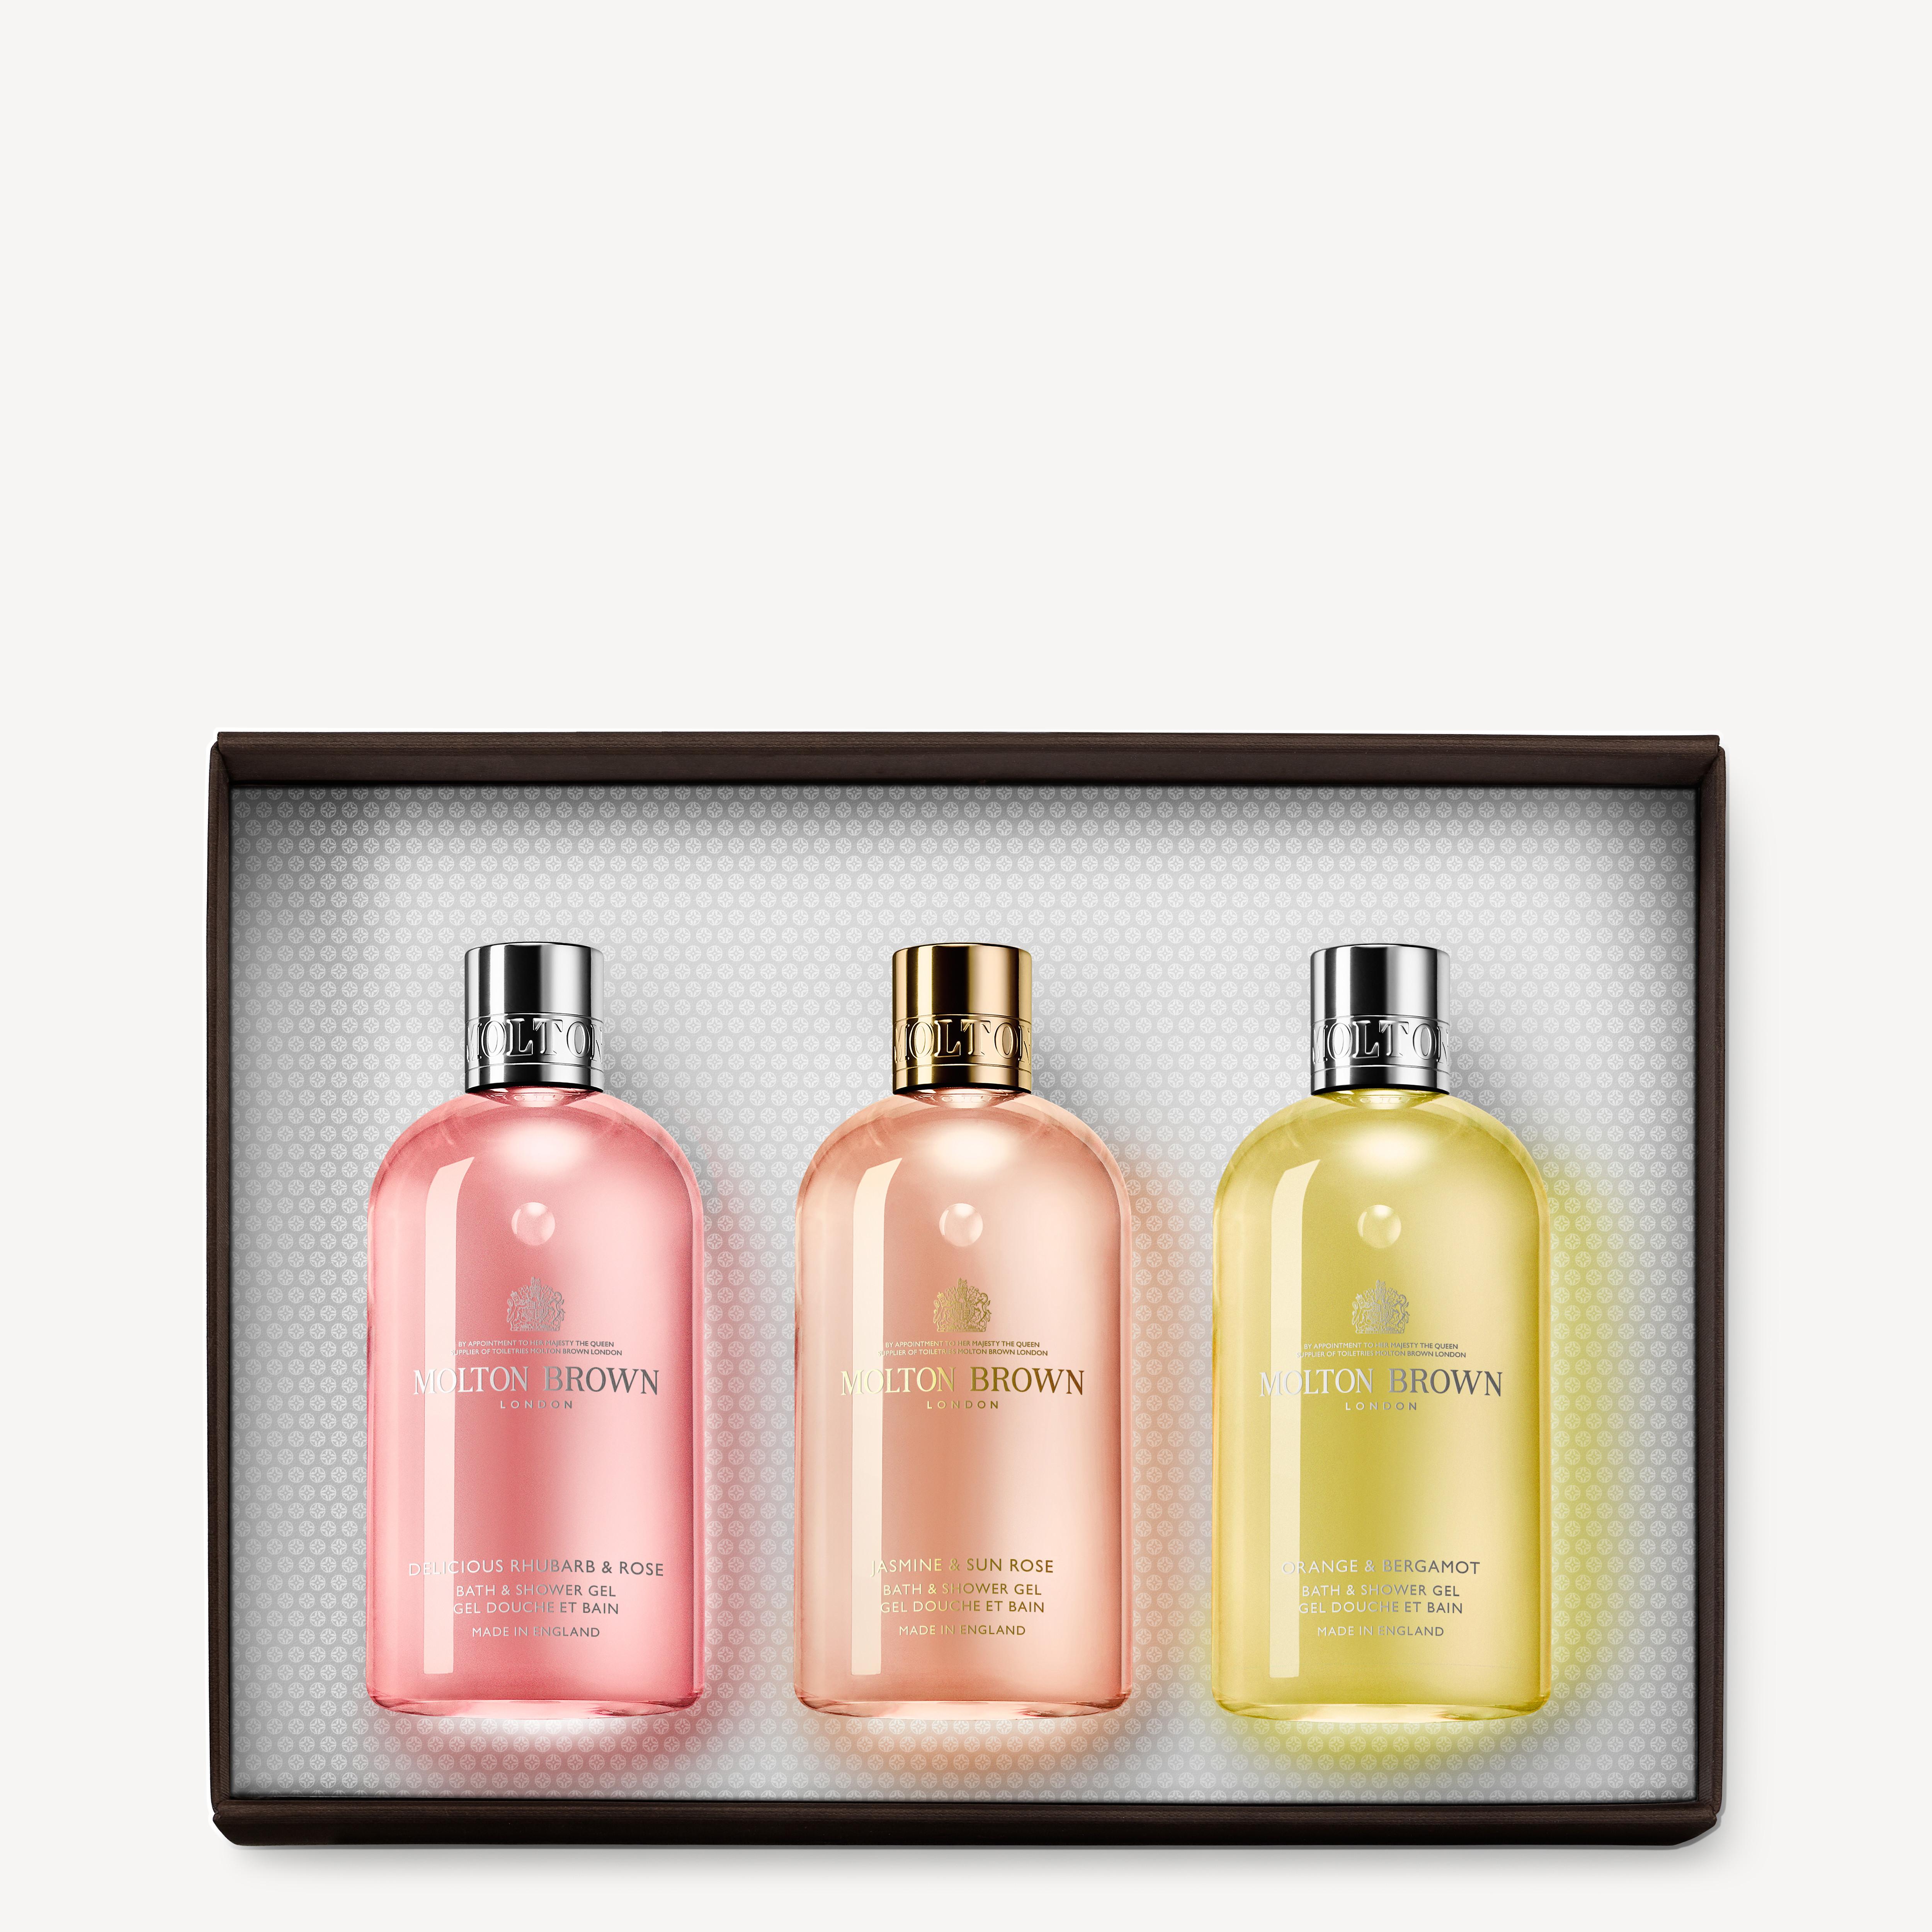 Molton Brown Floral & Fruity Gift Set